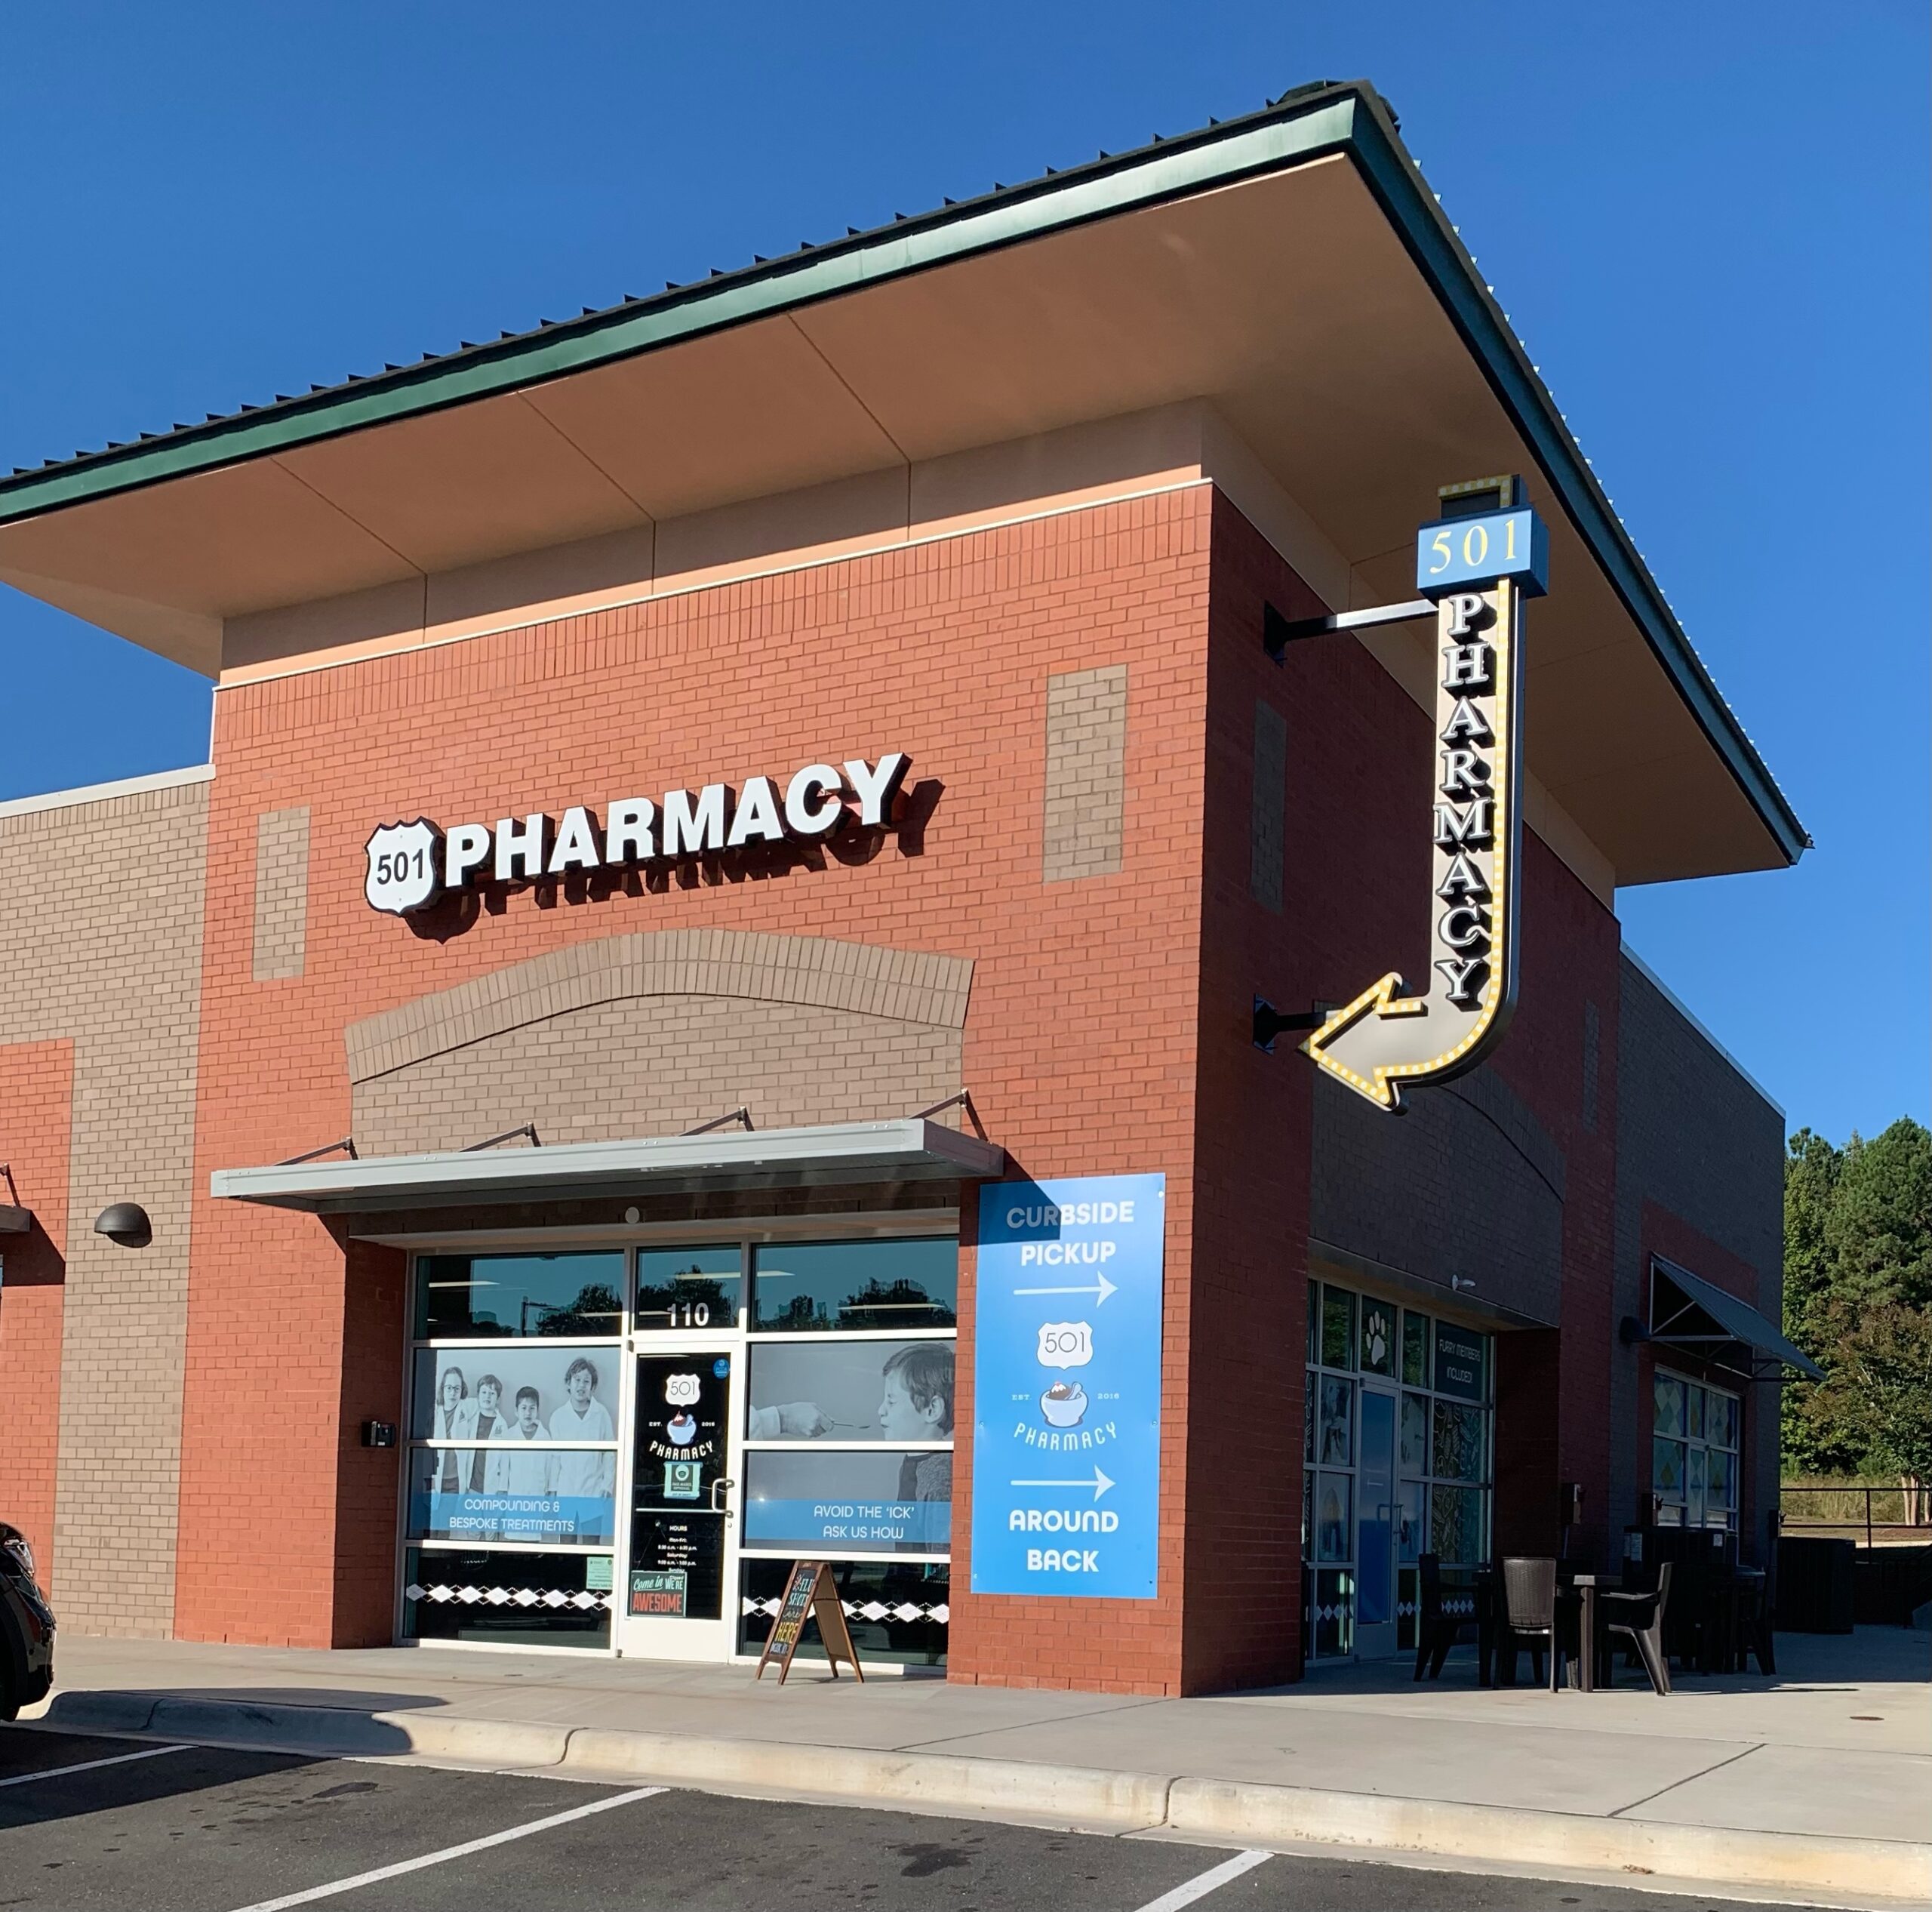 501 Pharmacy Chapel Hill - Curbside Service - Drive Up Around Back